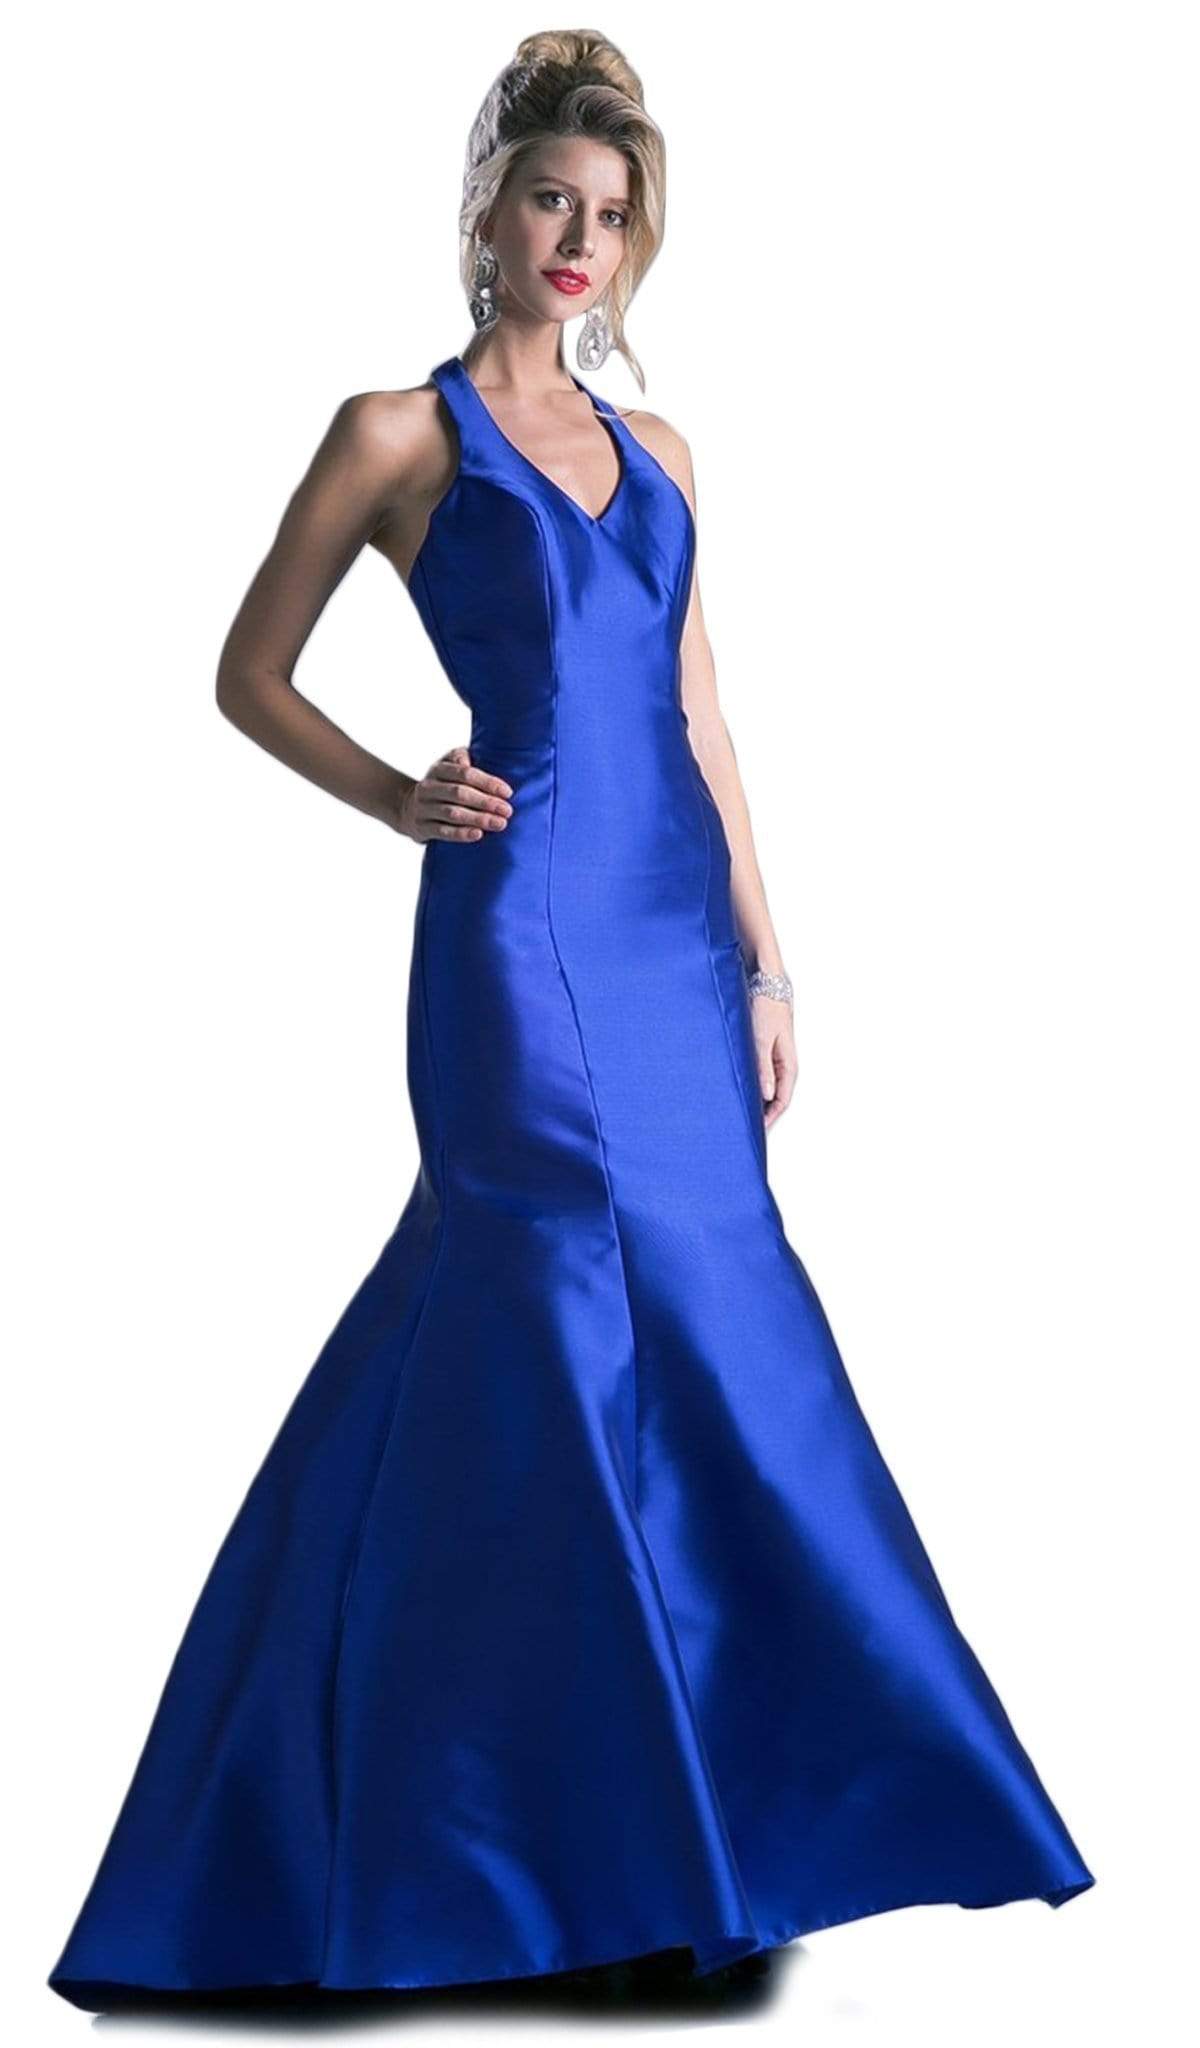 Cinderella Divine - Sleeveless Low V-Neck Satin Trumpet Evening Gown Special Occasion Dress 2 / Royal